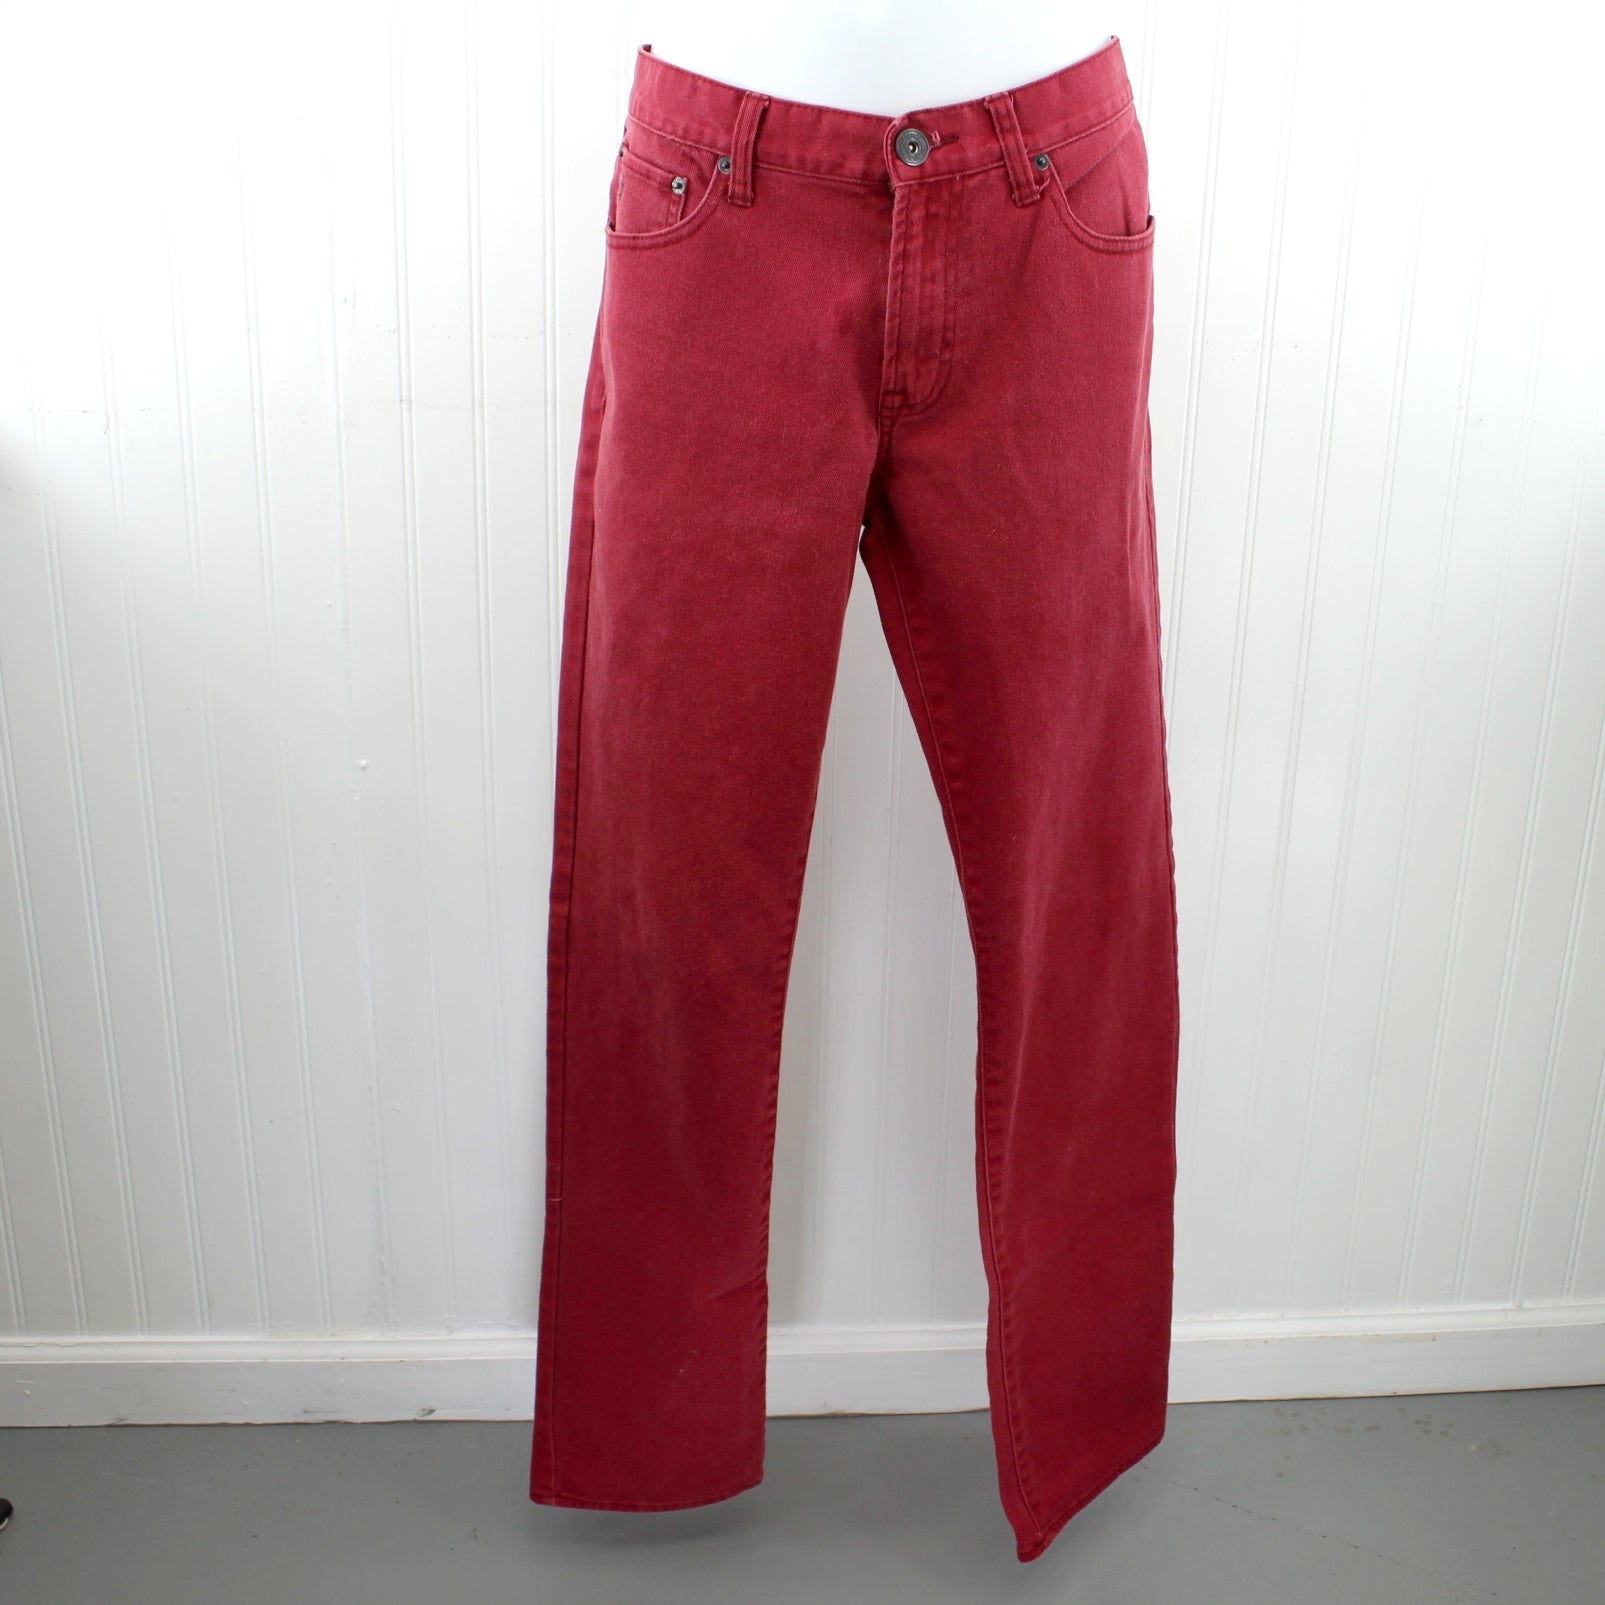 Aeropostale Bowery Slim Straight Jeans Red Cotton 98% Size 32/34